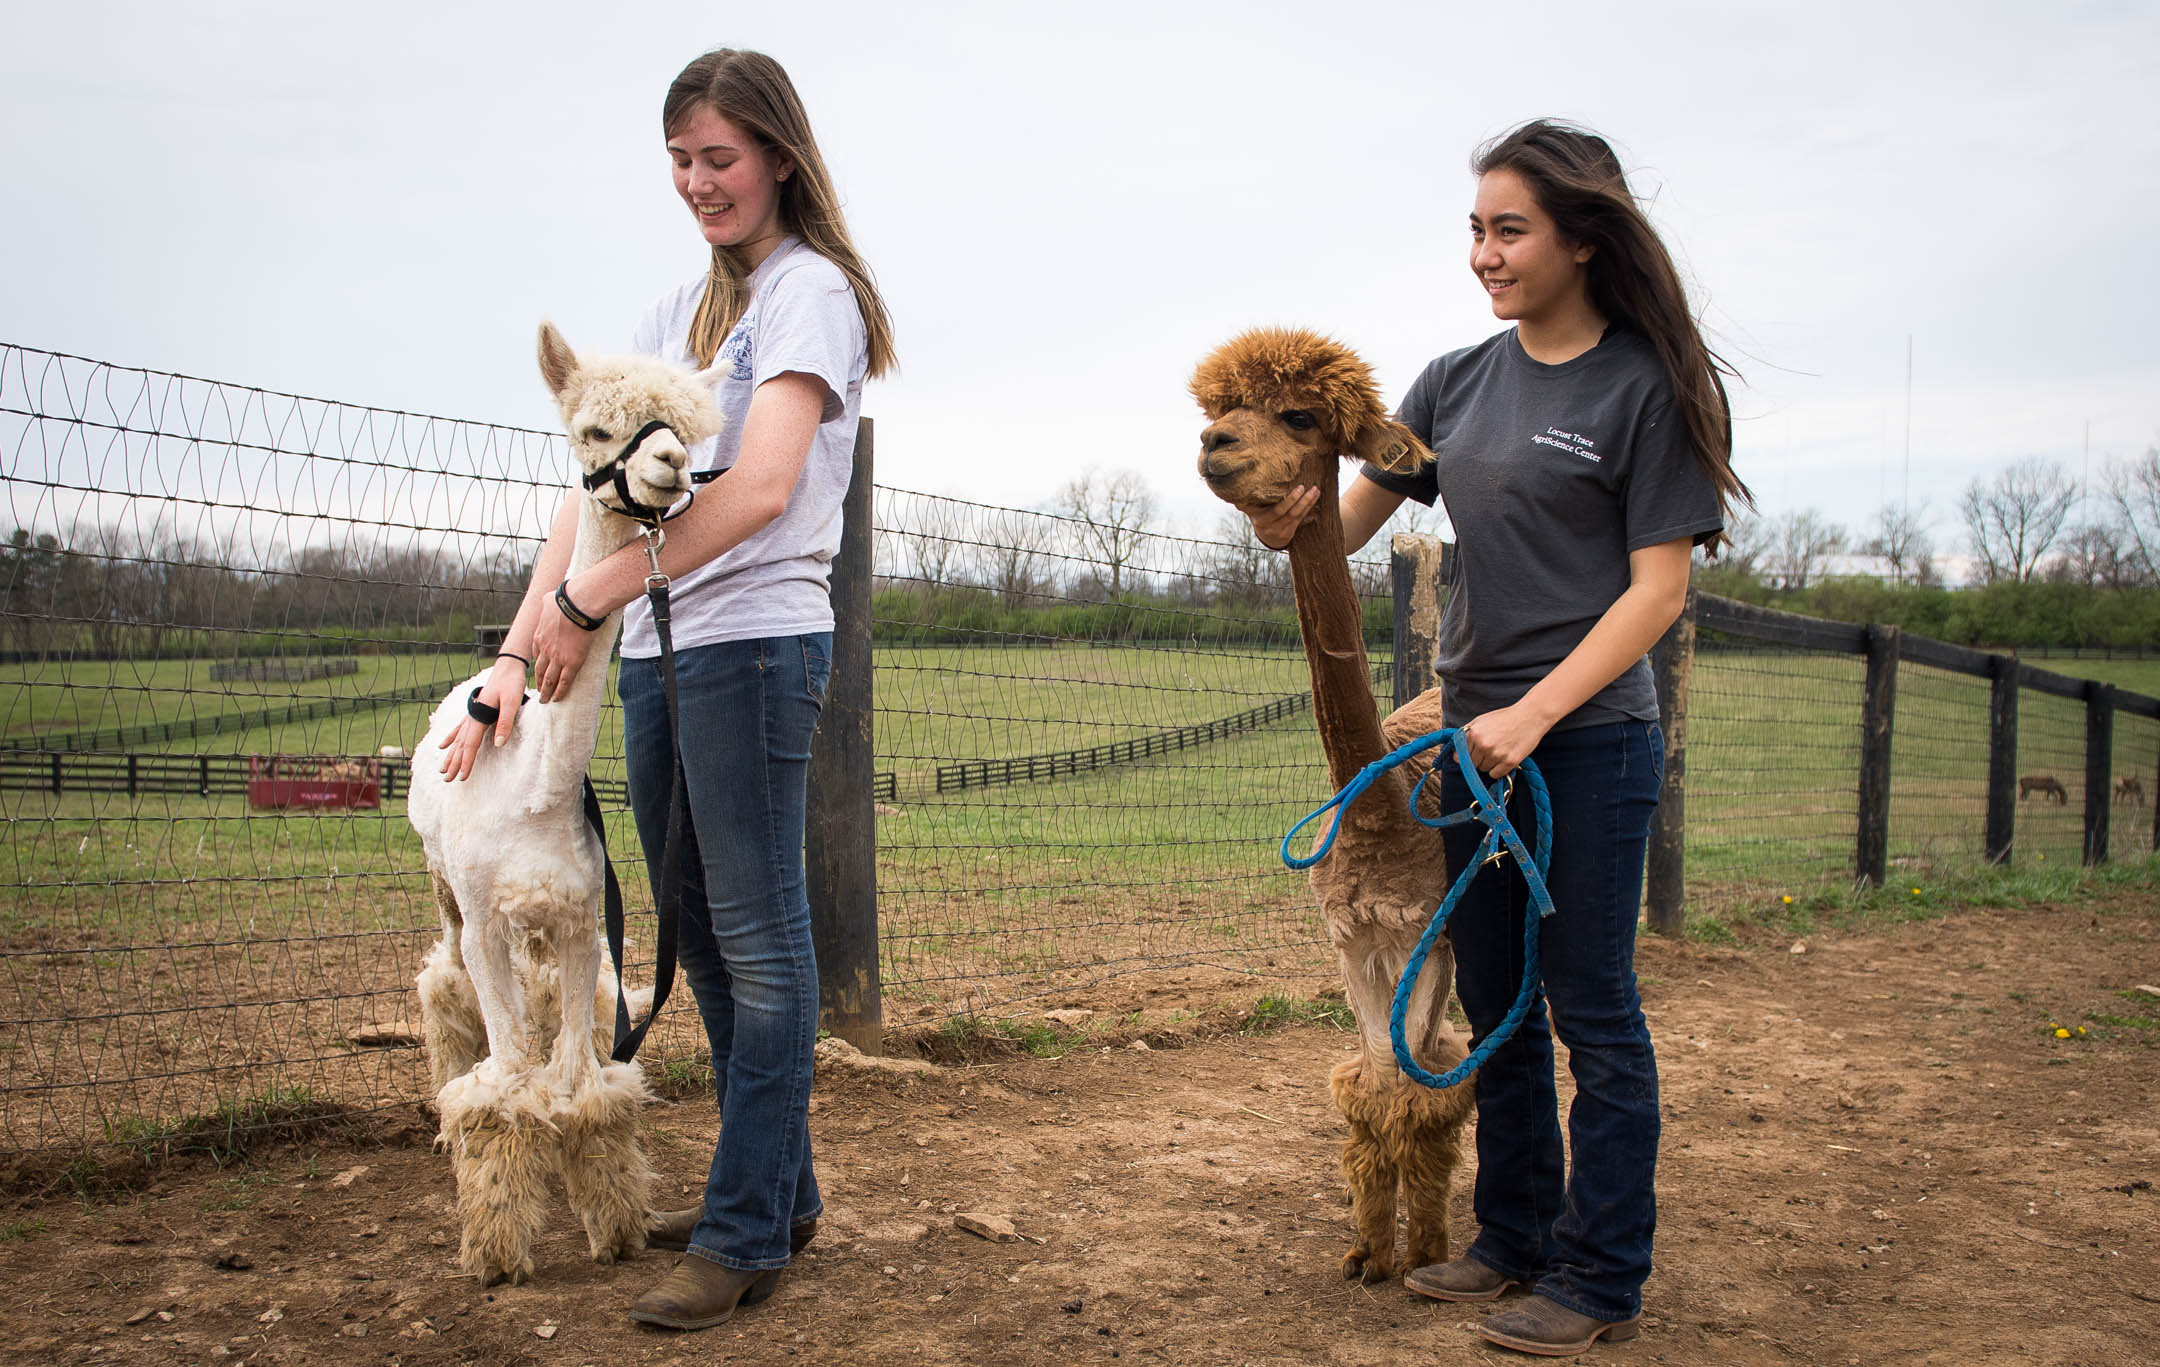 Kiley Power, left, and Shantel Sturgill with their recently sheared alpacas, Henri and Billy Mae. Photo by Bobby Ellis, March 30, 2017